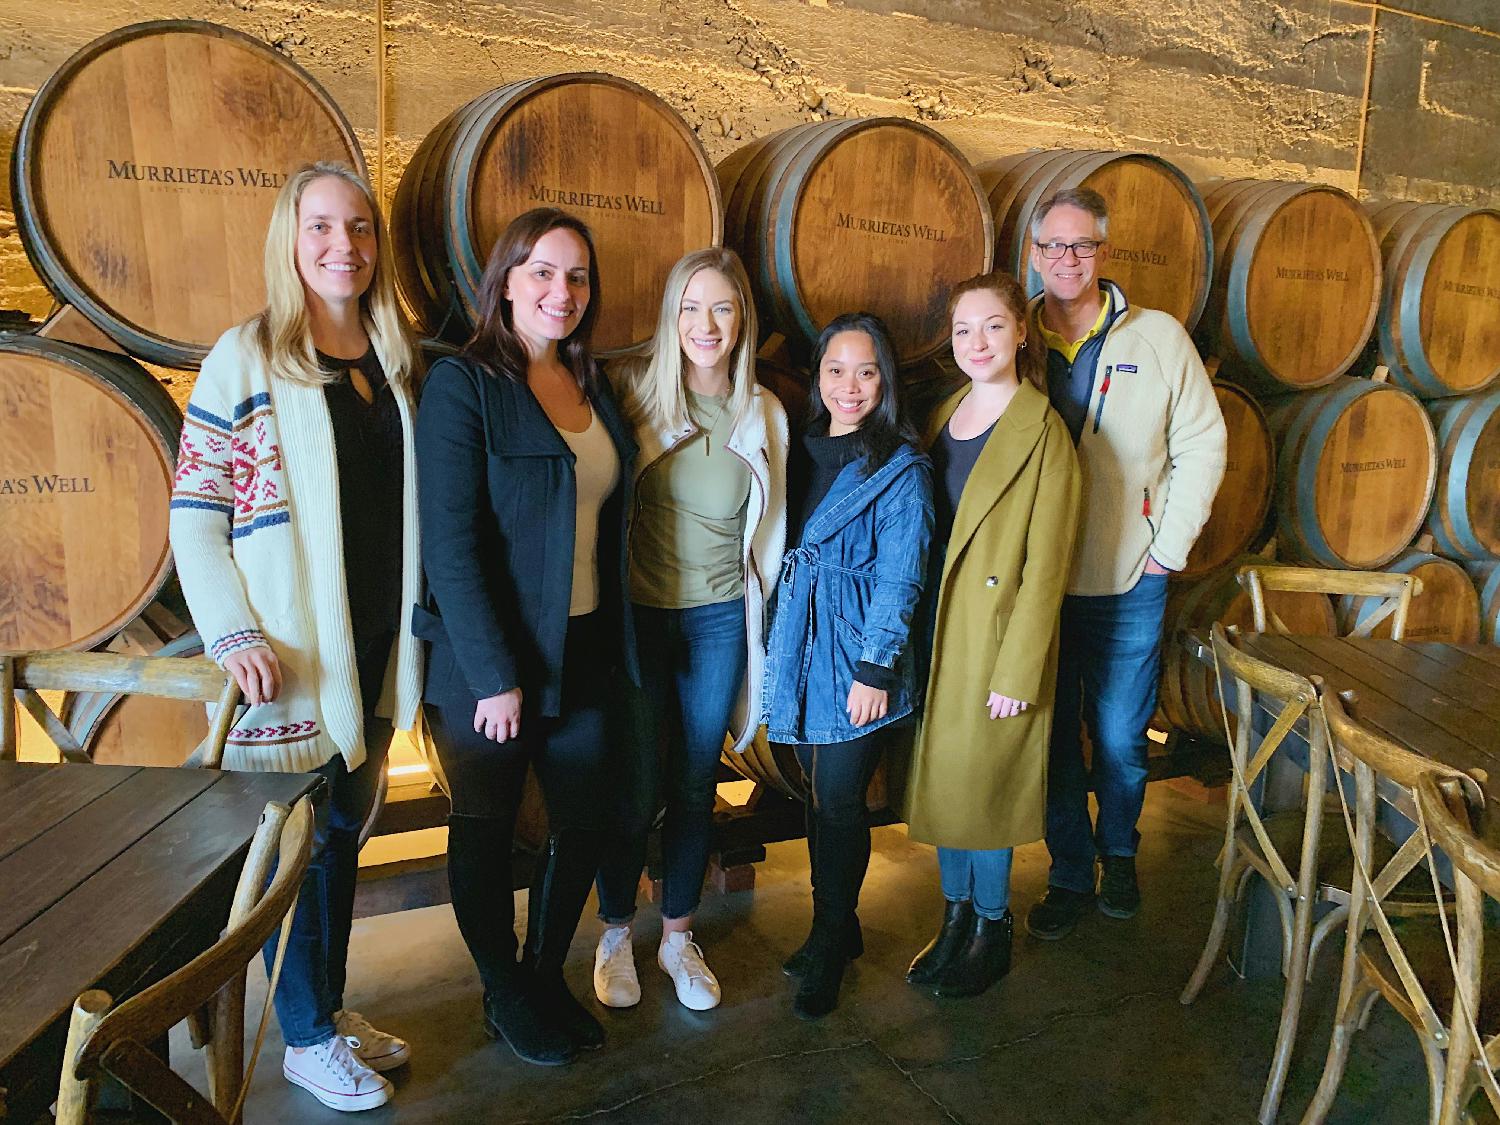 We work and play in the Bay Area. Today's adventure – Wente Vineyards!